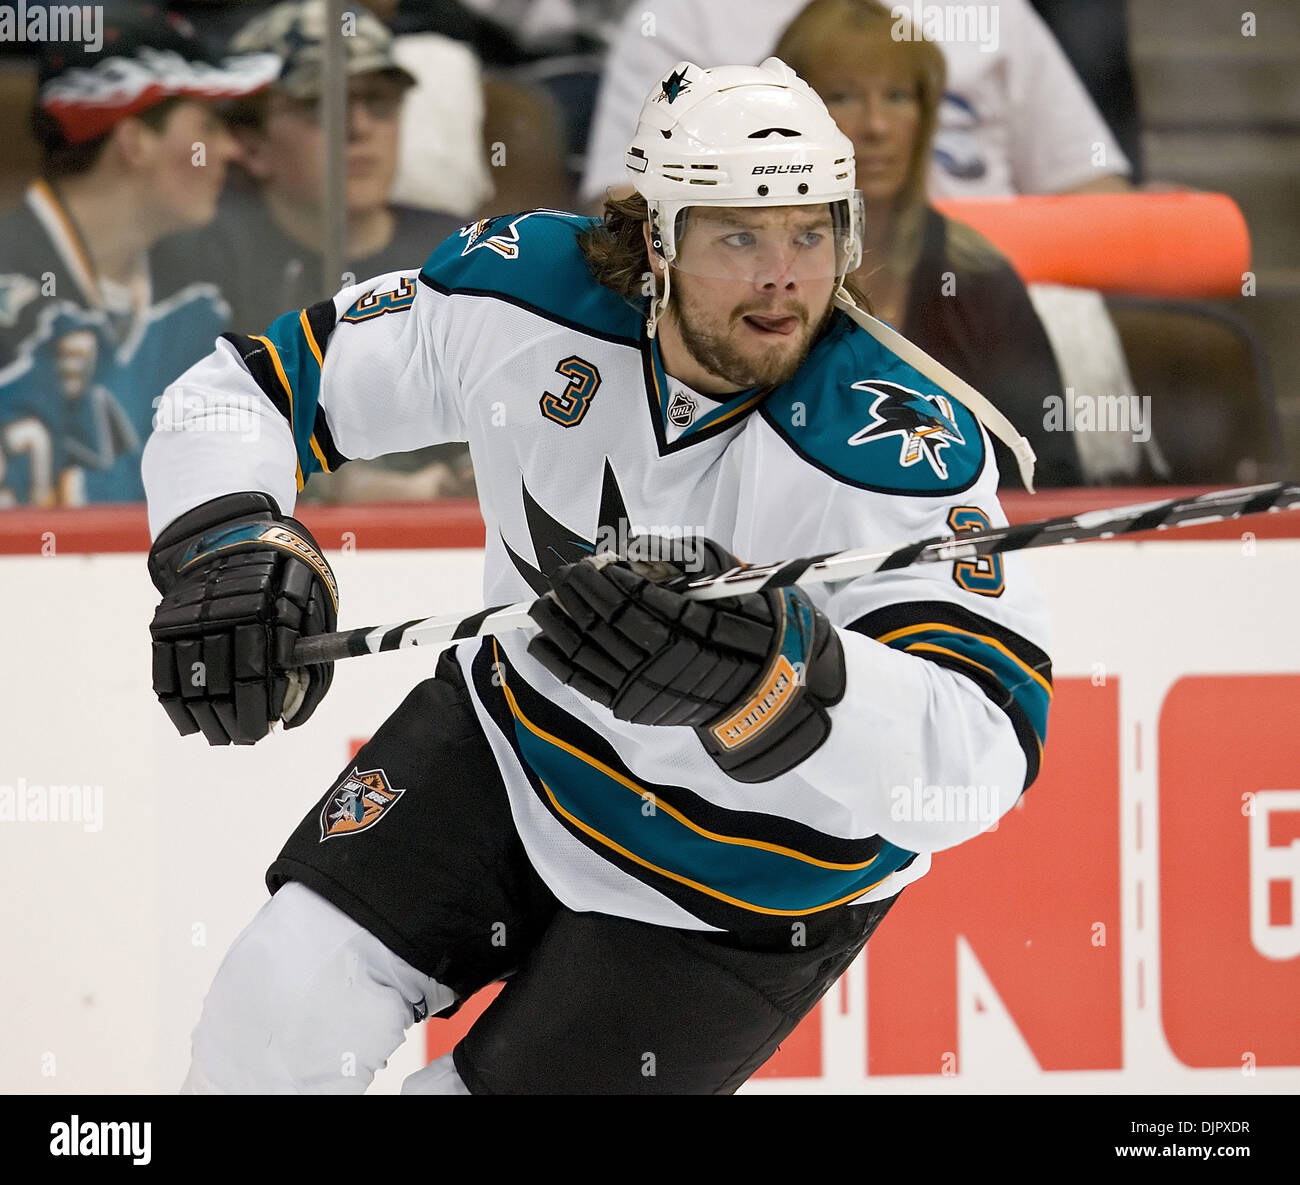 Apr 24, 2010 - Denver, Colorado, USA - DOUGLAS MURRAY of the San Jose Sharks  during warm-ups for game 6 of the NHL Western Conference Quarterfinals at  the Pepsi Center. (Credit Image: ©